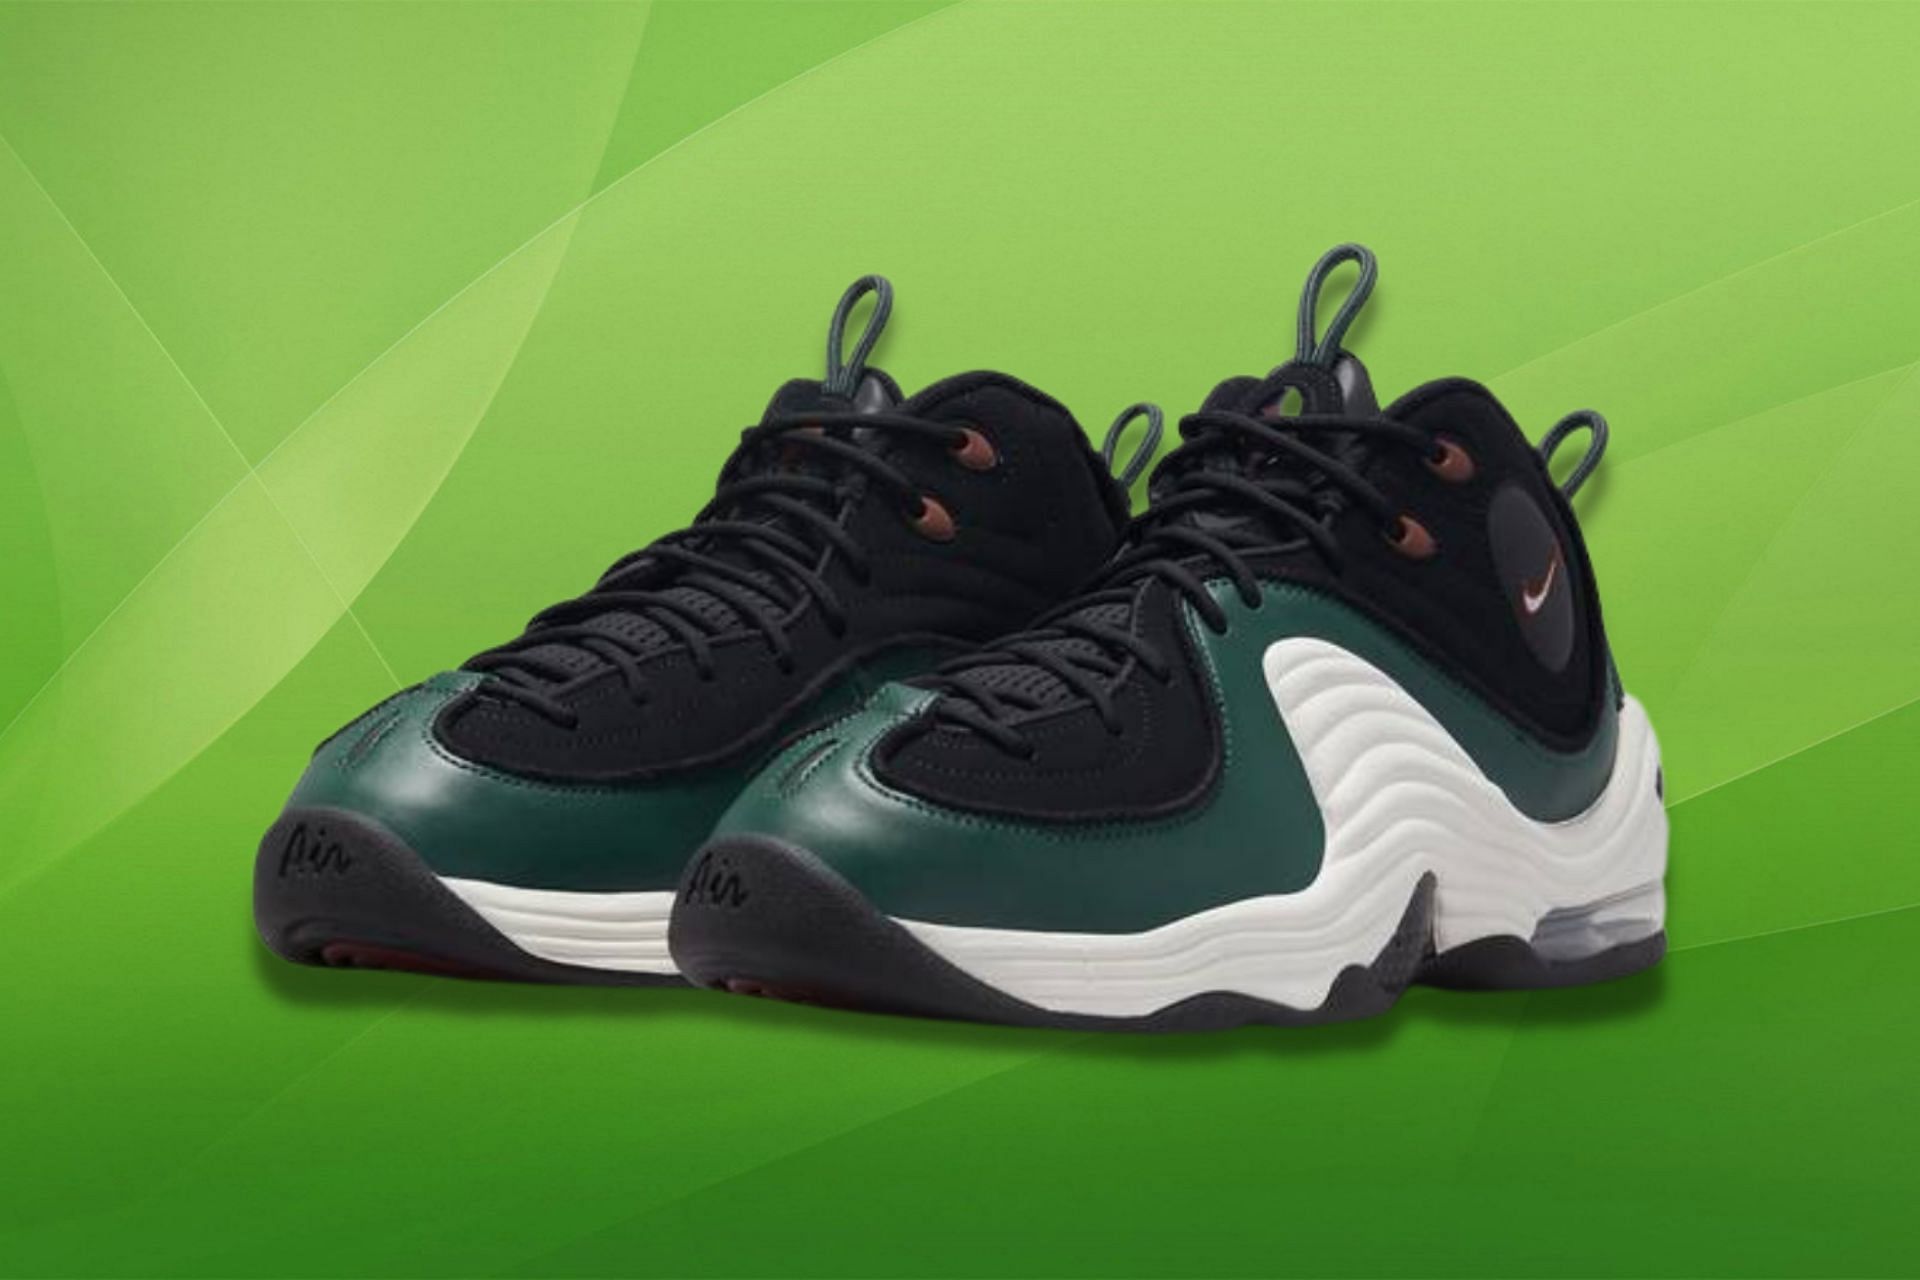 Nike Air Penny 2 Forest Green shoes (Image via Nike)